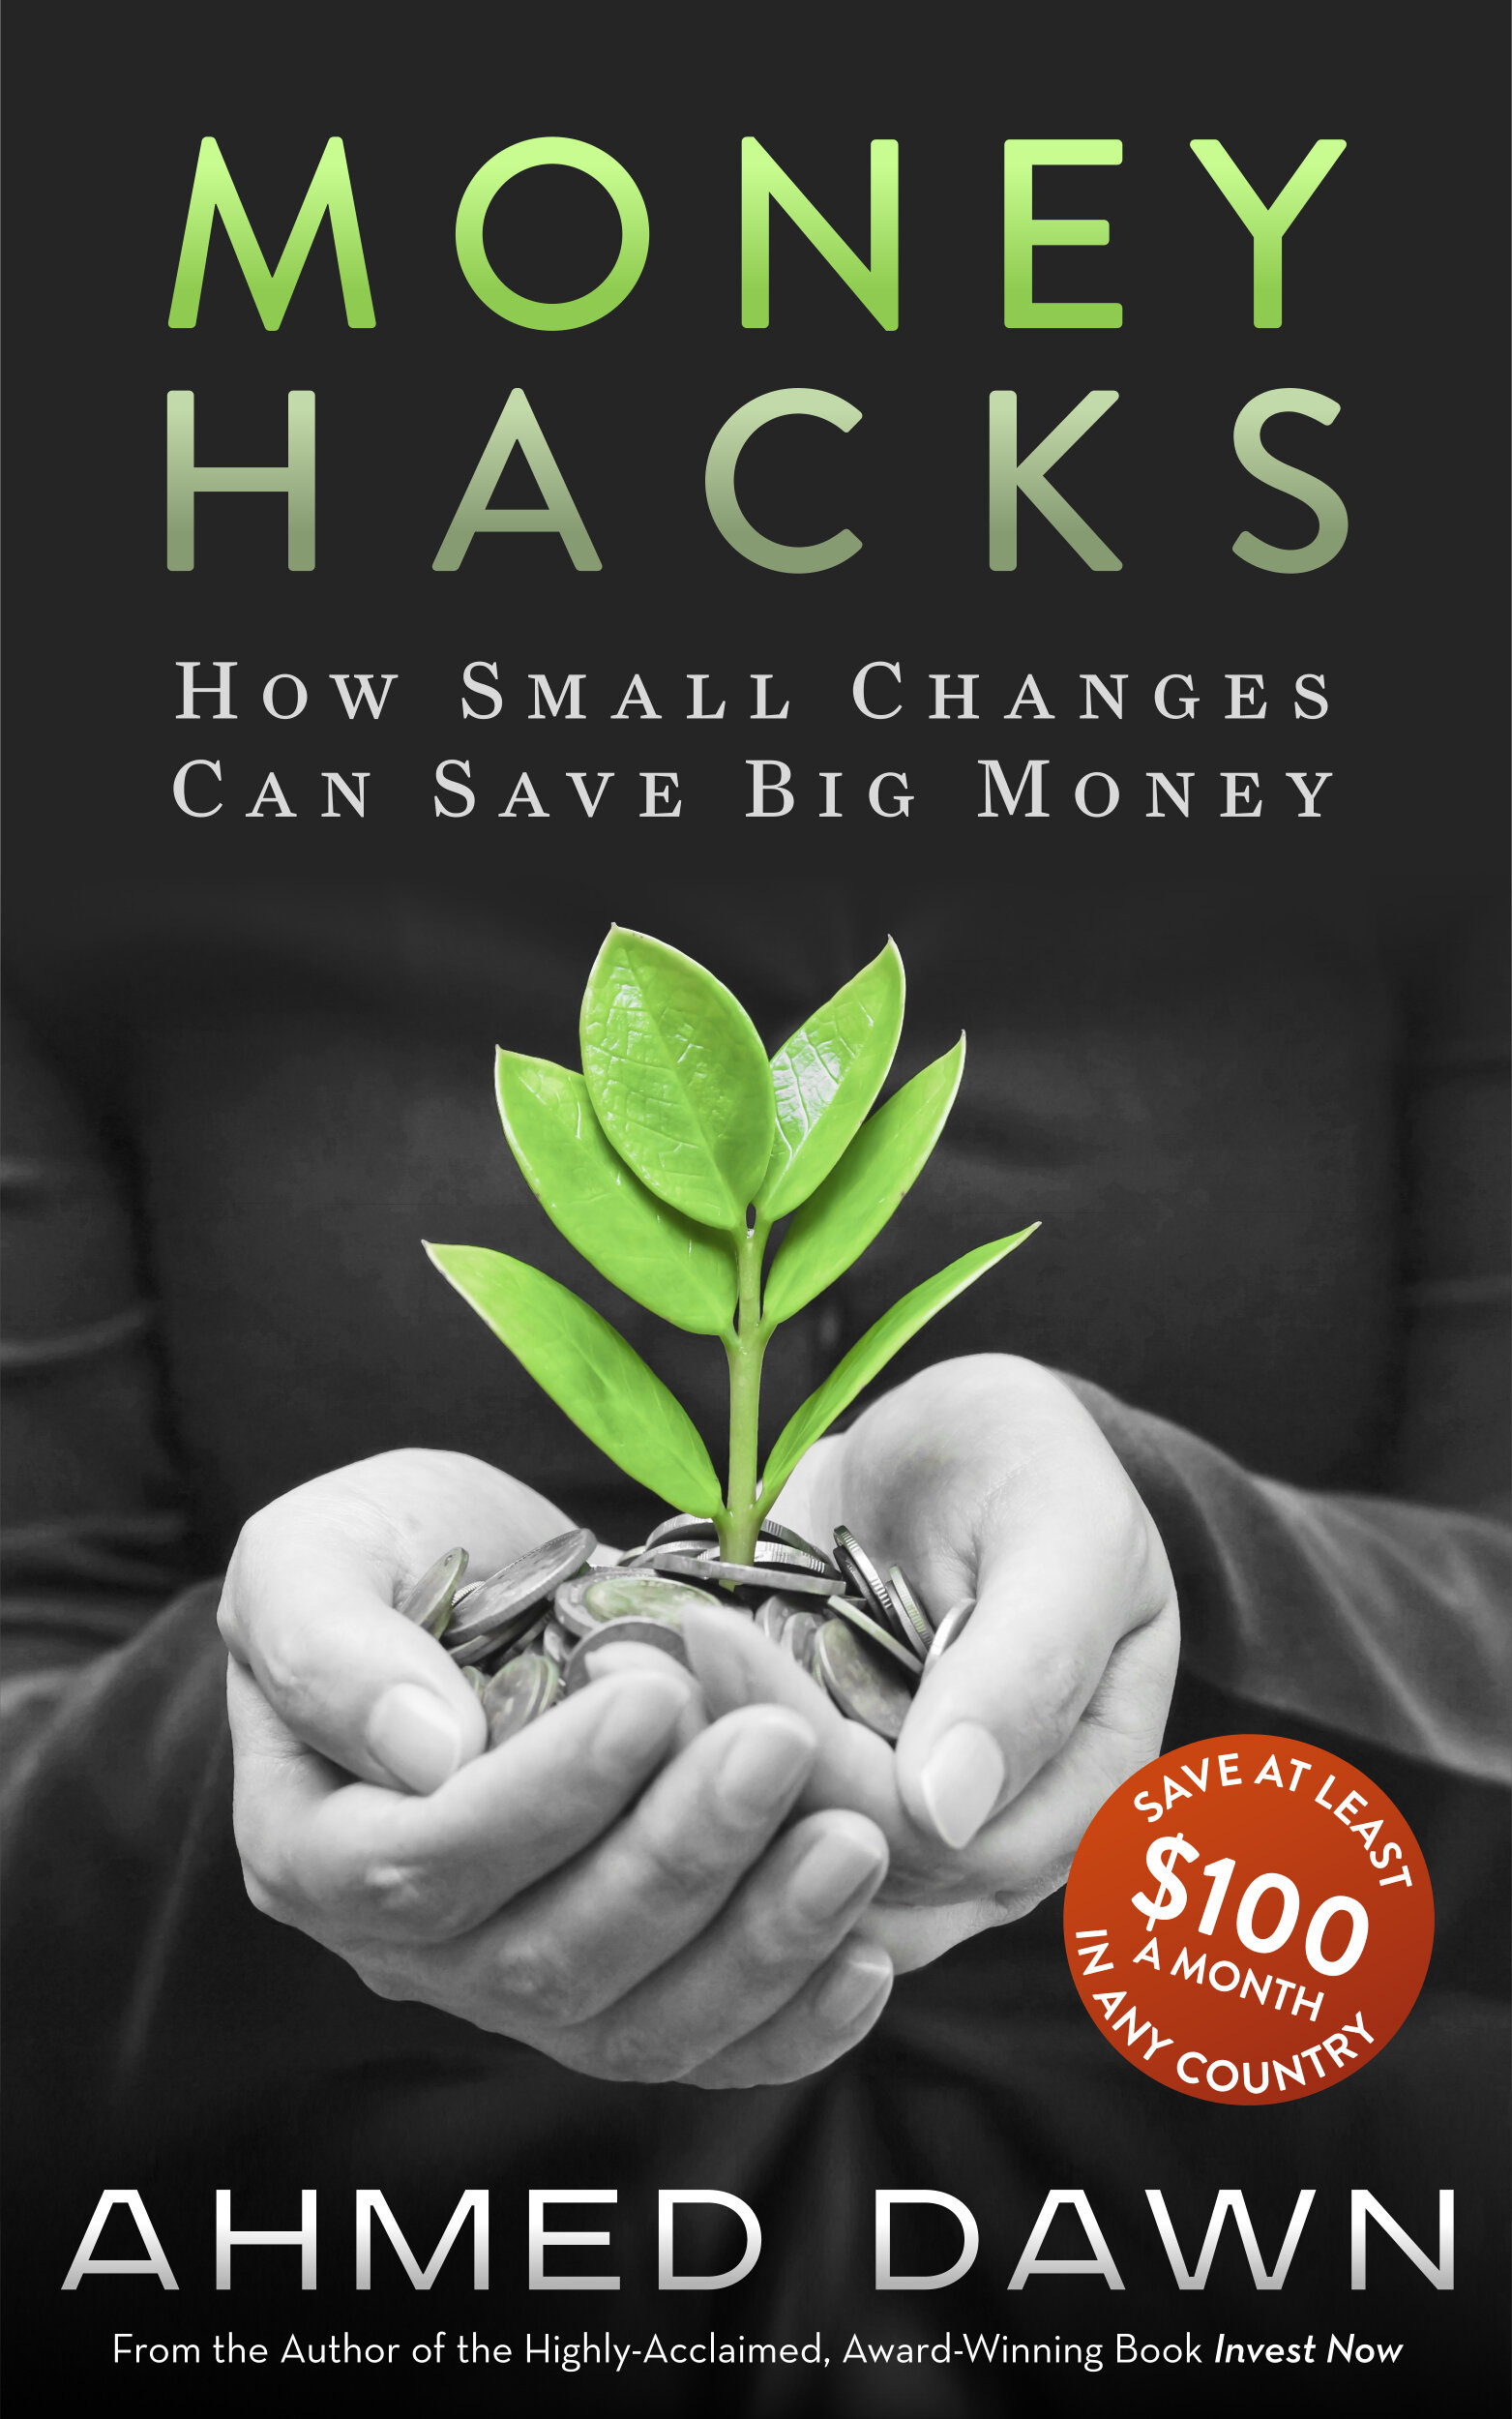 Money Hacks How Small Changes Can Save Big Money.jpg